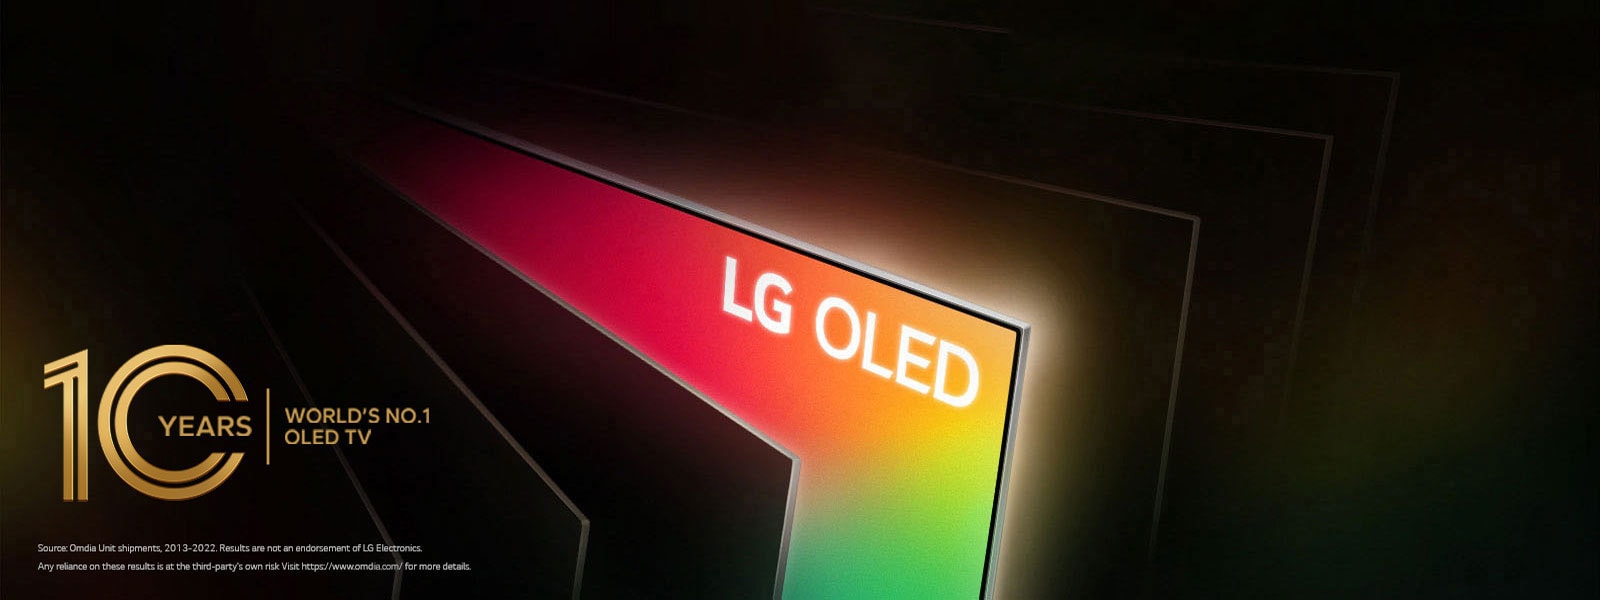 An angled bird's eye view of a row of televisions spanned out like the pages of a book. All the televisions are black, except one filled with bright colors and the words "LG OLED."